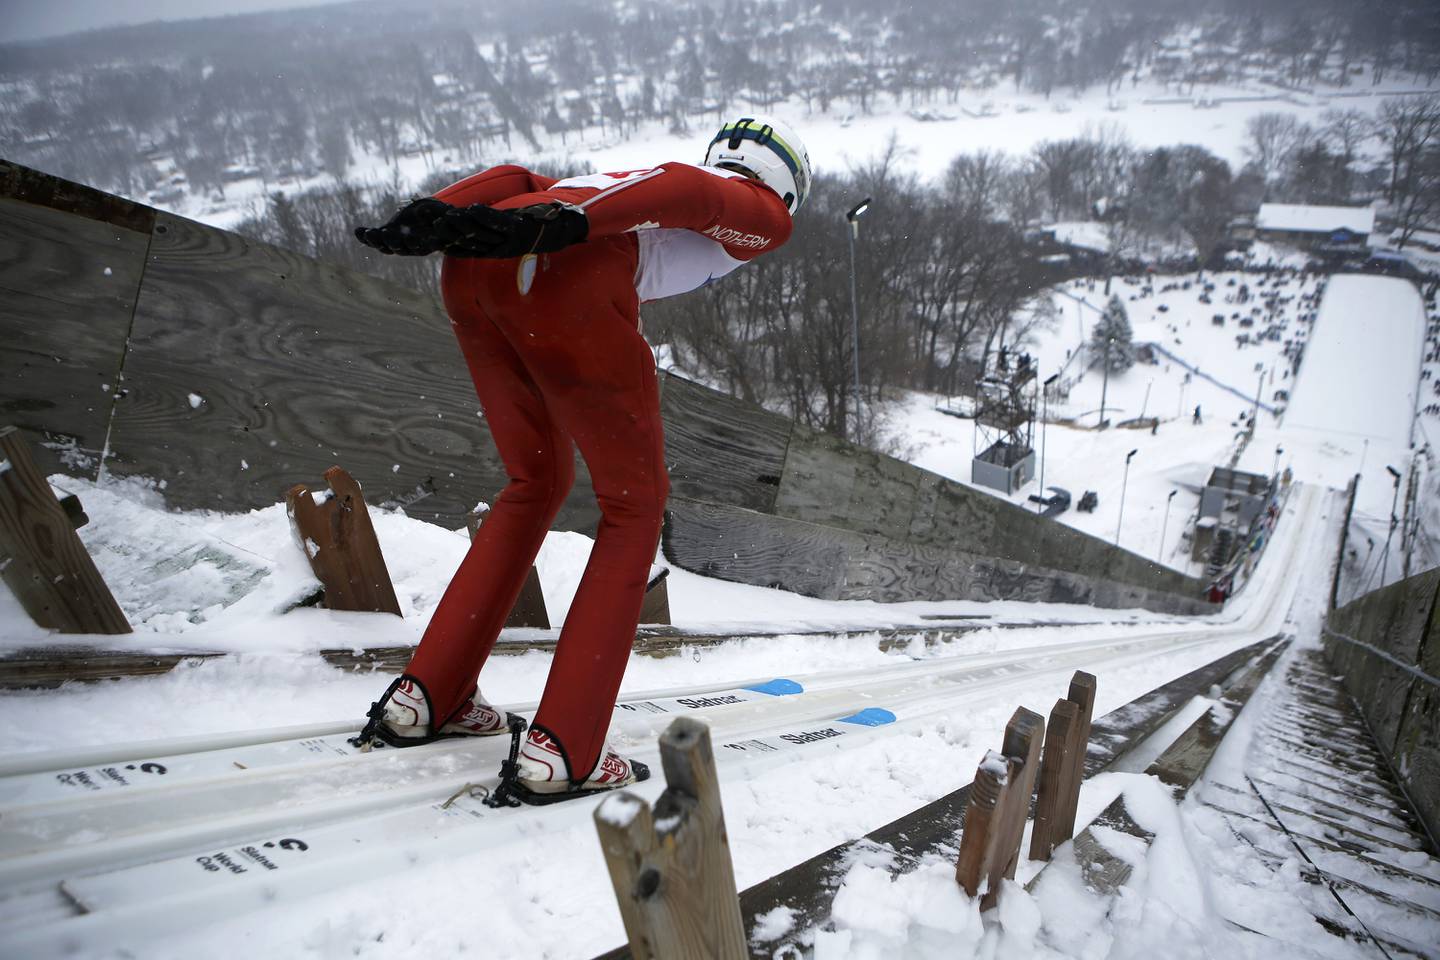 Stewart Gundry jumps while competing in the 116th Norge Annual Winter Ski Jump Tournament at the Norge Ski Club in Fox River Grove, Ill., on Sunday, Jan. 31, 2021.